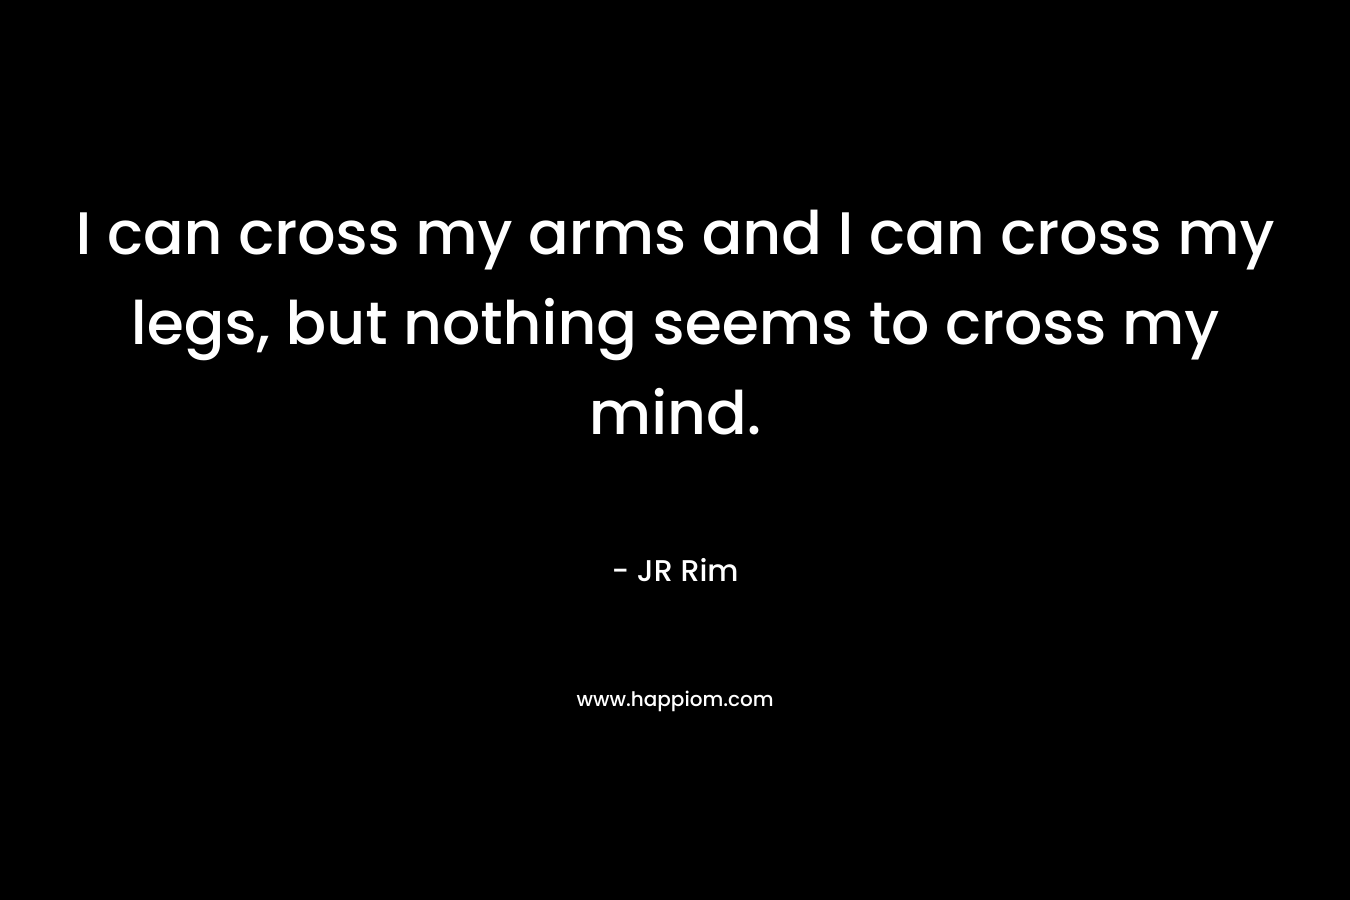 I can cross my arms and I can cross my legs, but nothing seems to cross my mind.